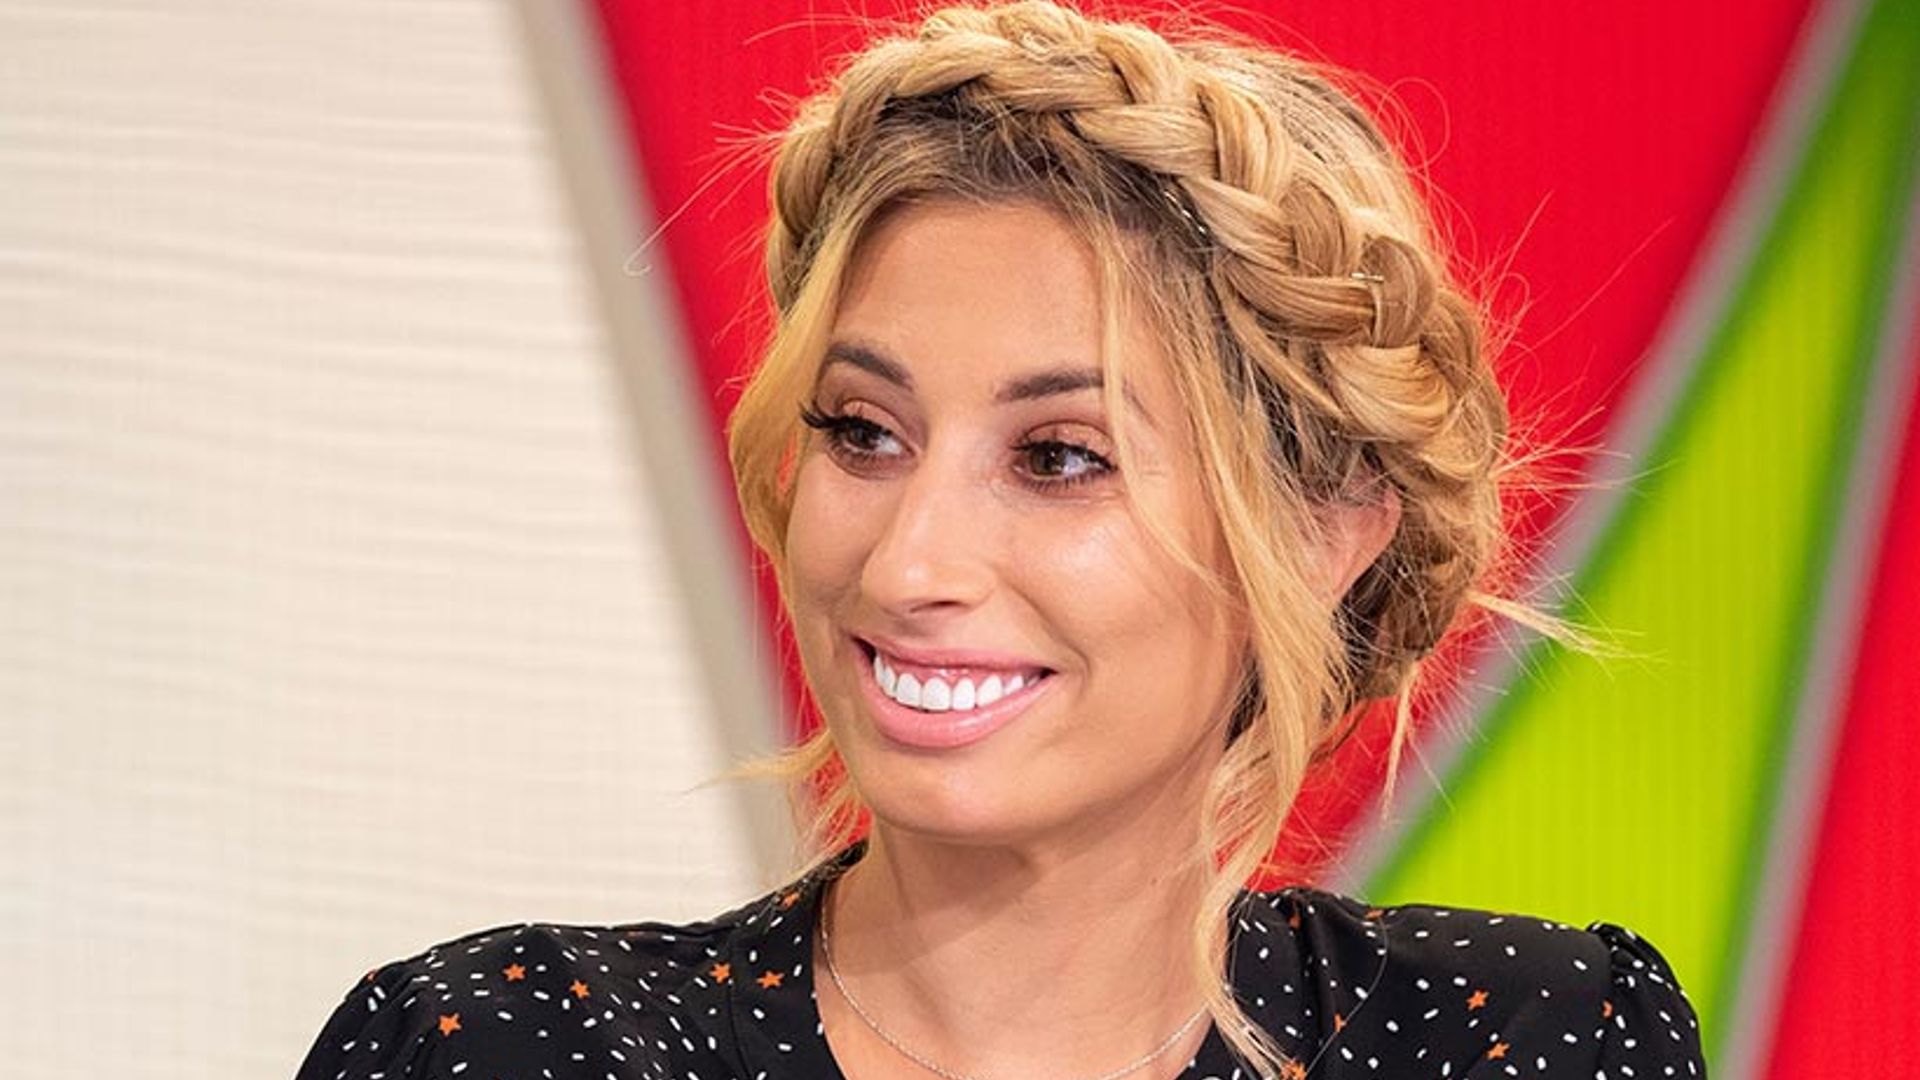 The £12 rainbow fashion bargain that Stacey Solomon can't get enough of